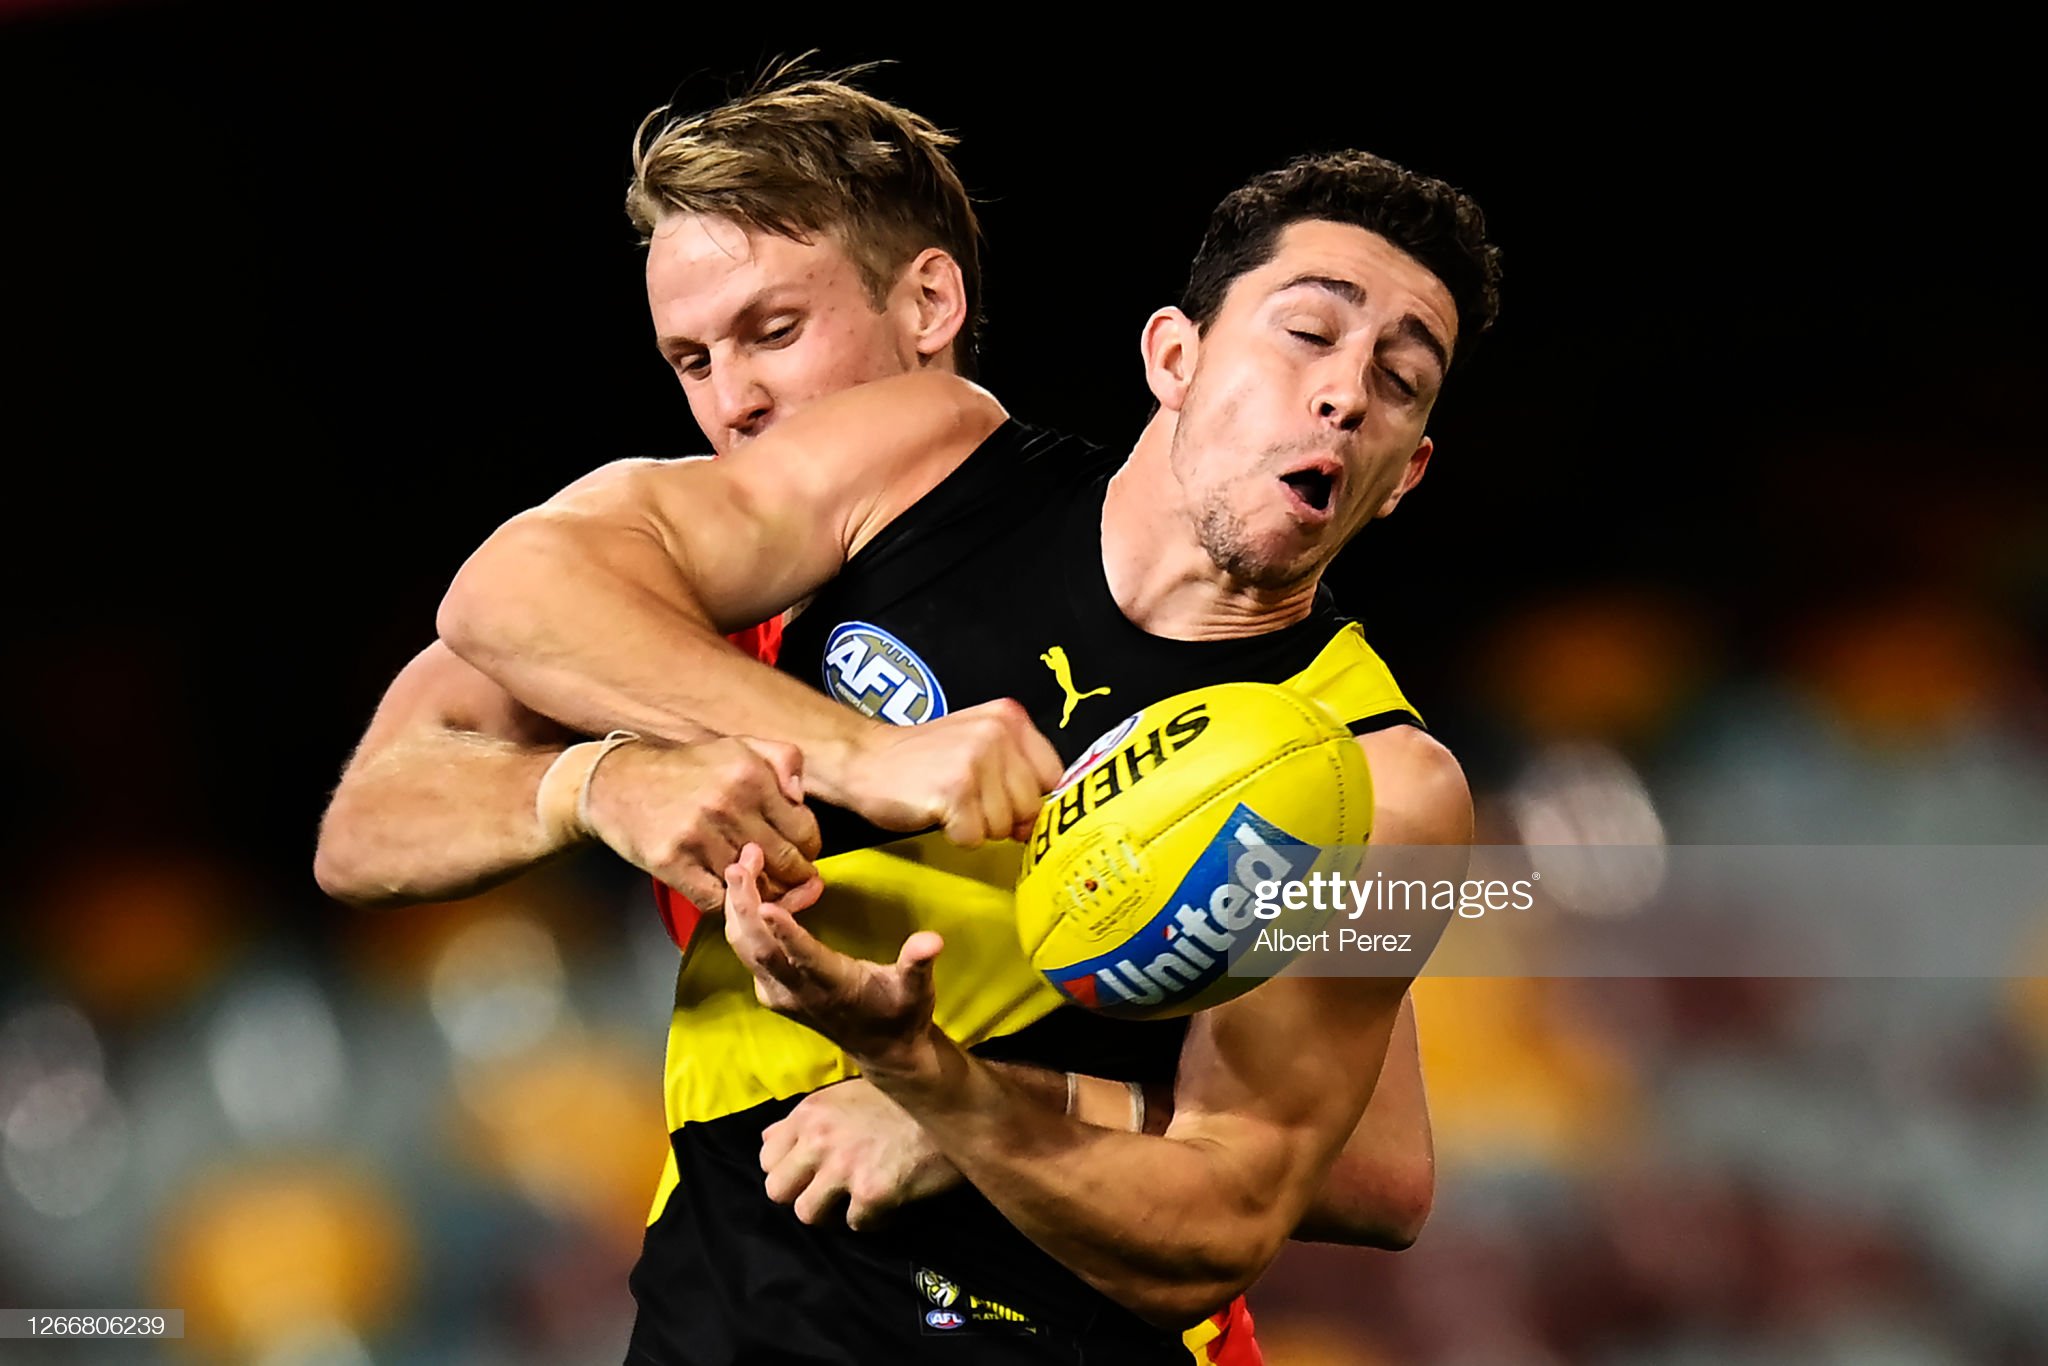 jason-castagna-of-the-tigers-is-tackled-during-the-round-12-afl-match-picture-id1266806239